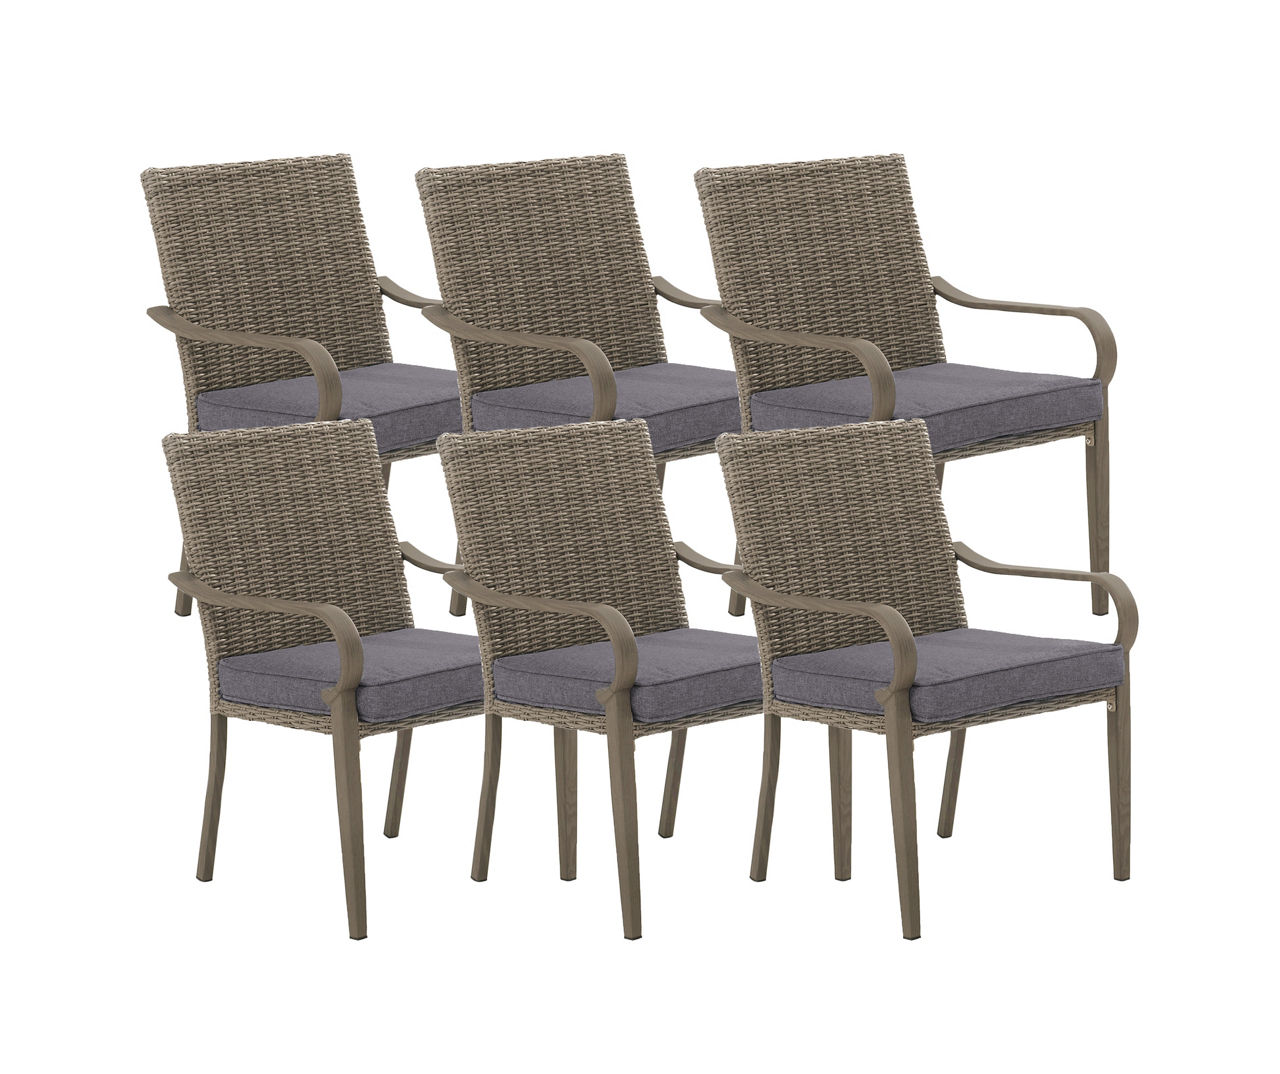 Autumn Cove Gray All-Weather Wicker Cushioned Patio Dining Chairs, 6-Pack